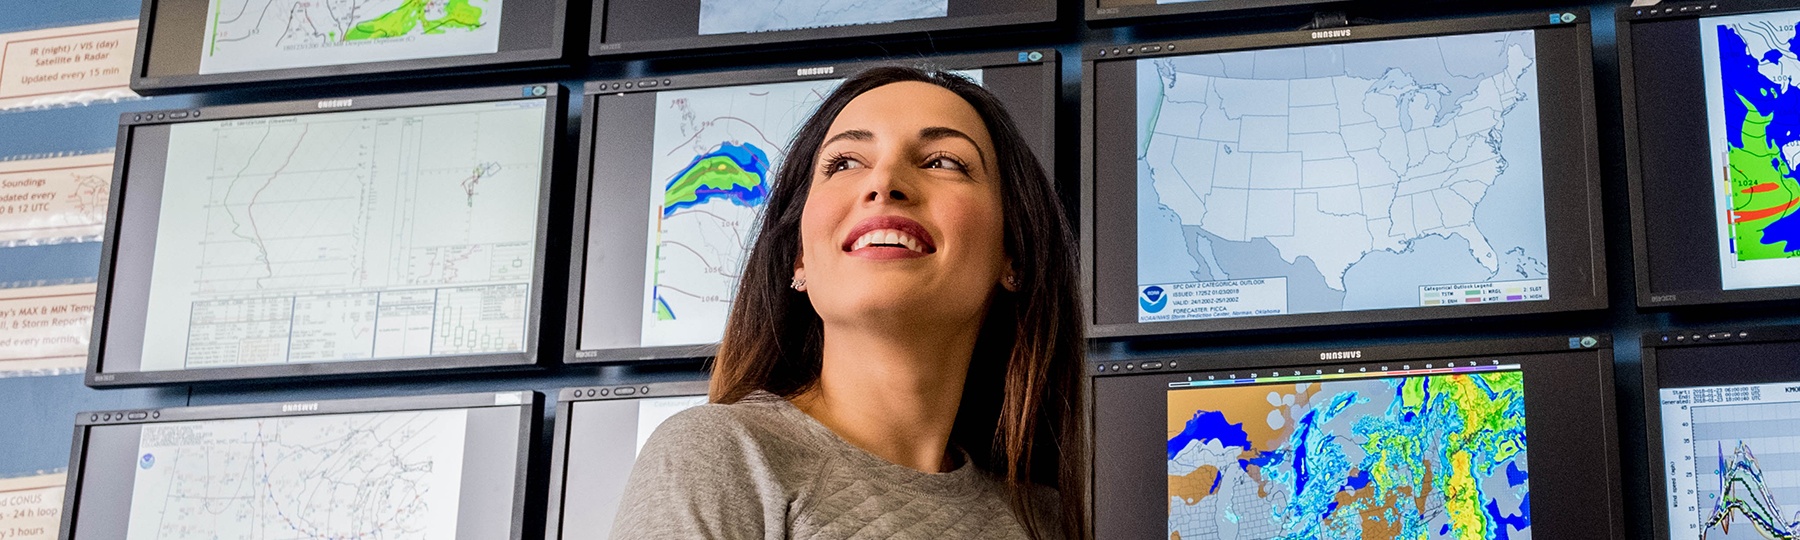 Meteorology student, Maria Molina, in front of the weather wall